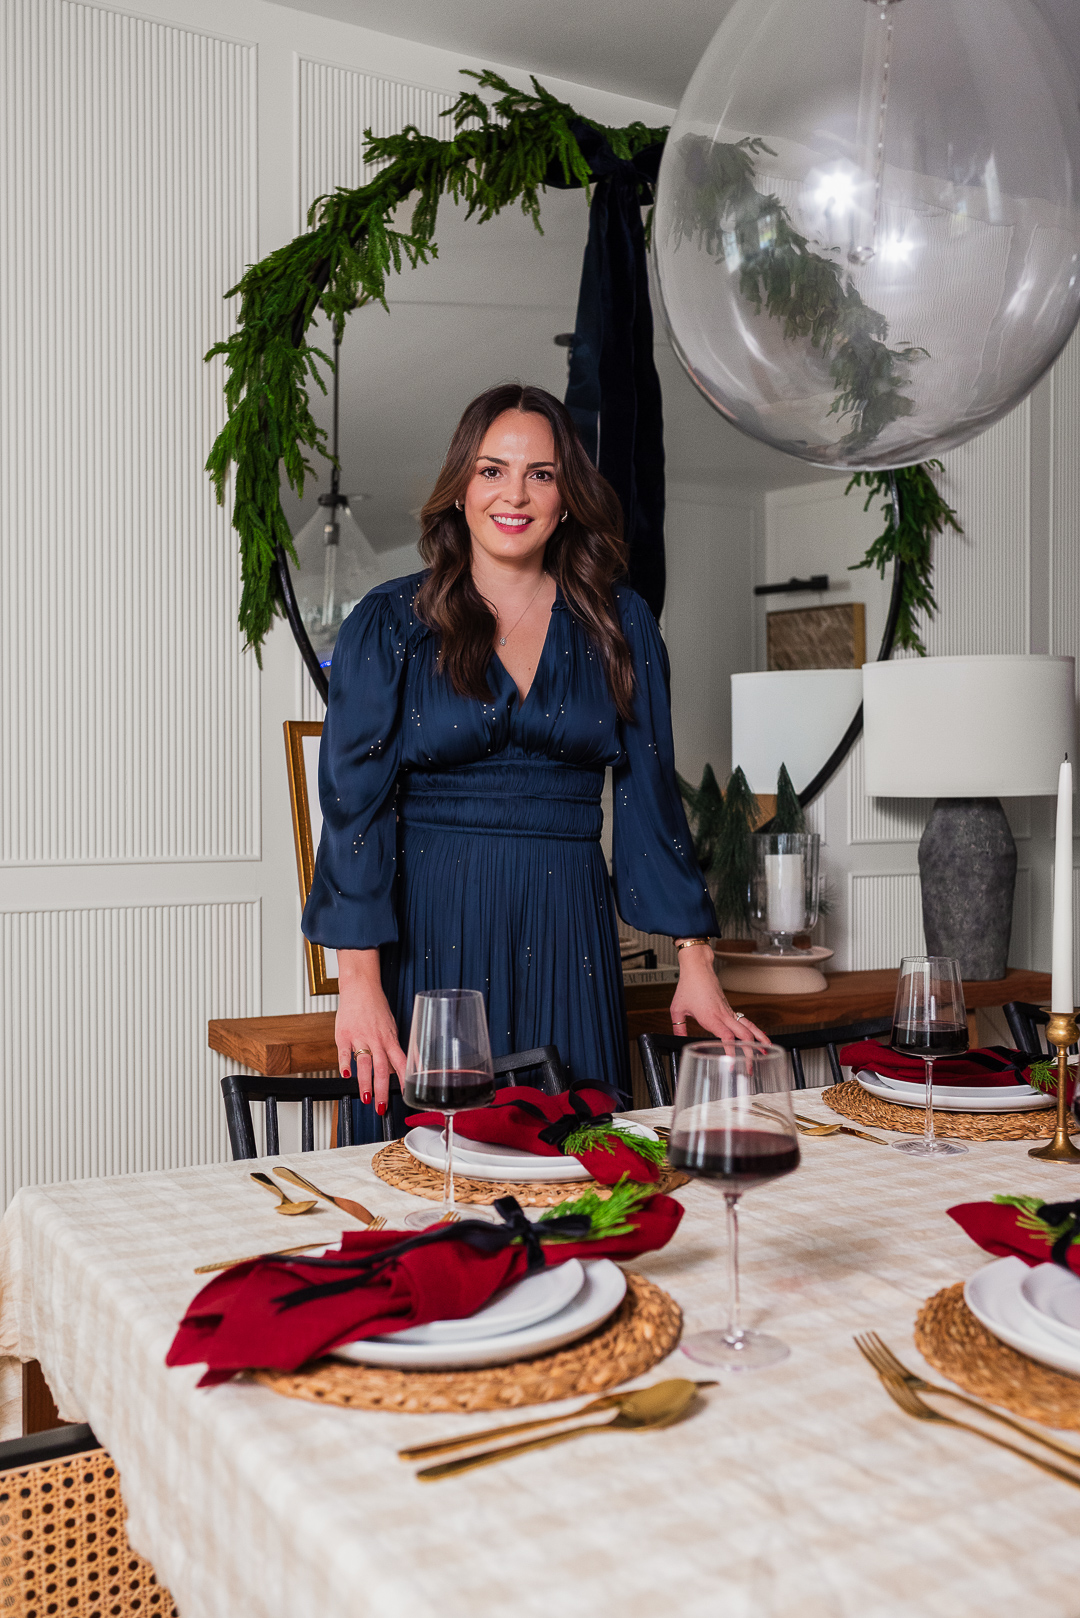 Ideas for a holiday tablescape with NJ interior designer Cara Shahbandi in